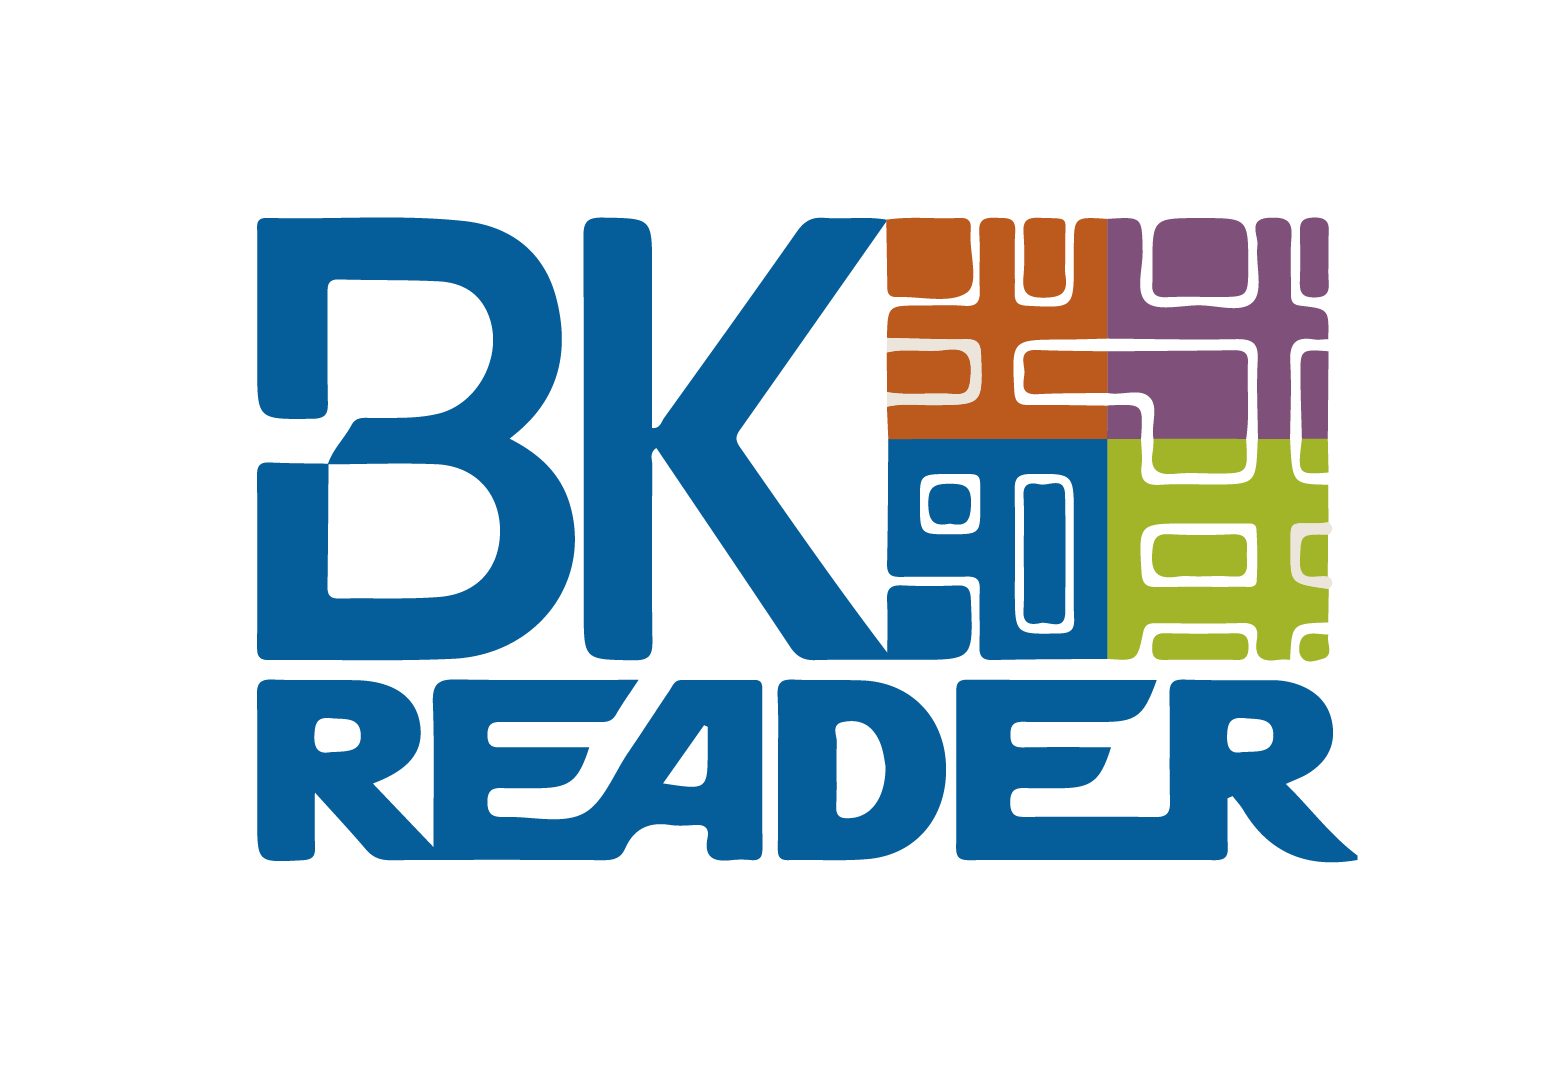 https://intersectionatthejunction.com/content/4-about/1-press/bklyner-logo-03.png